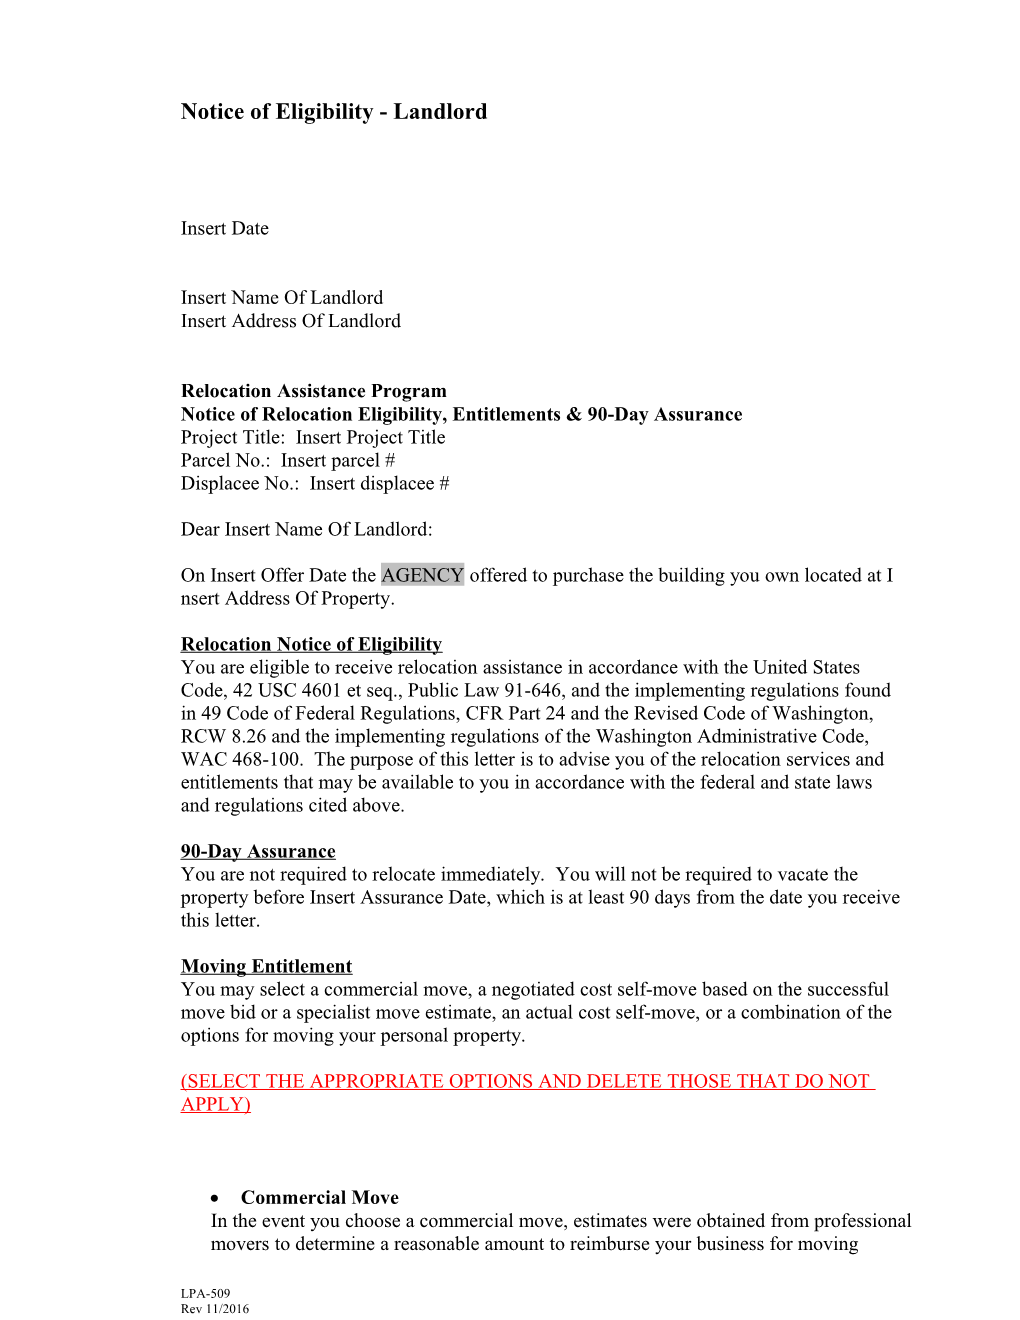 RES 509 Landlord Eligibility Notice